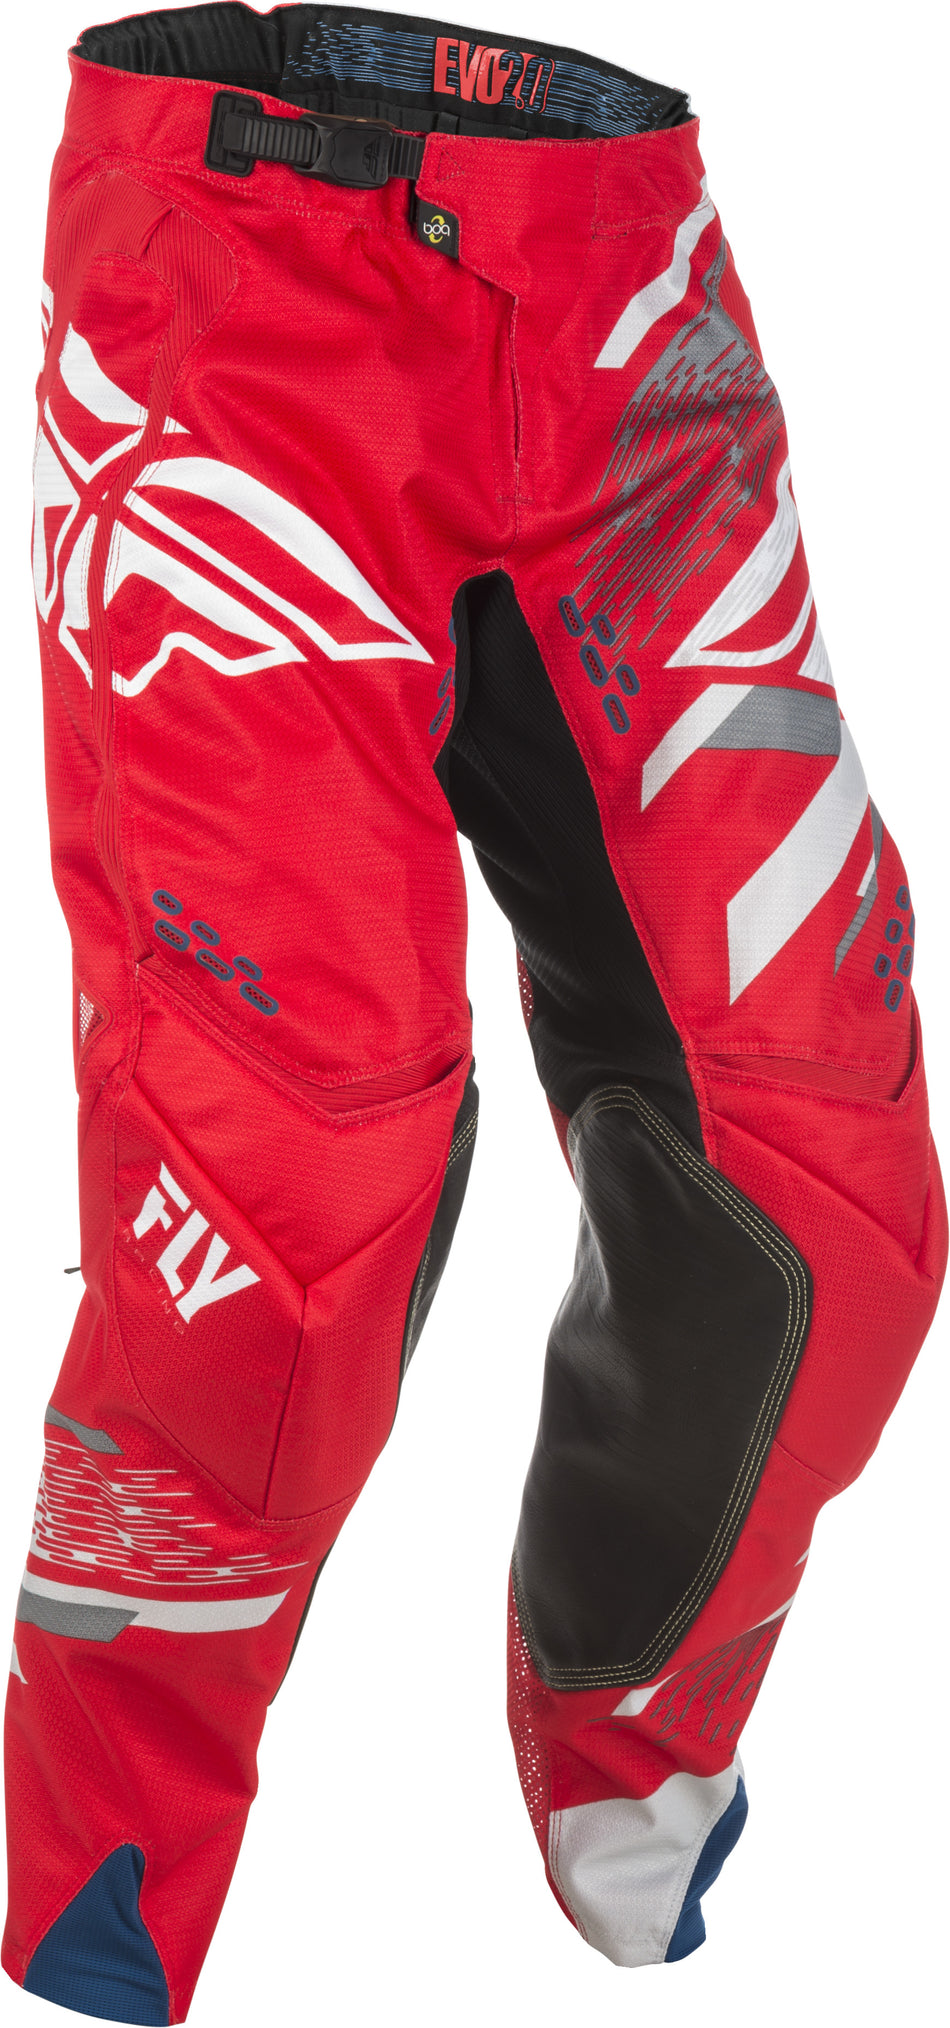 FLY RACING Evolution 2.0 Pants Red/Grey/White Sz 32 371-23232